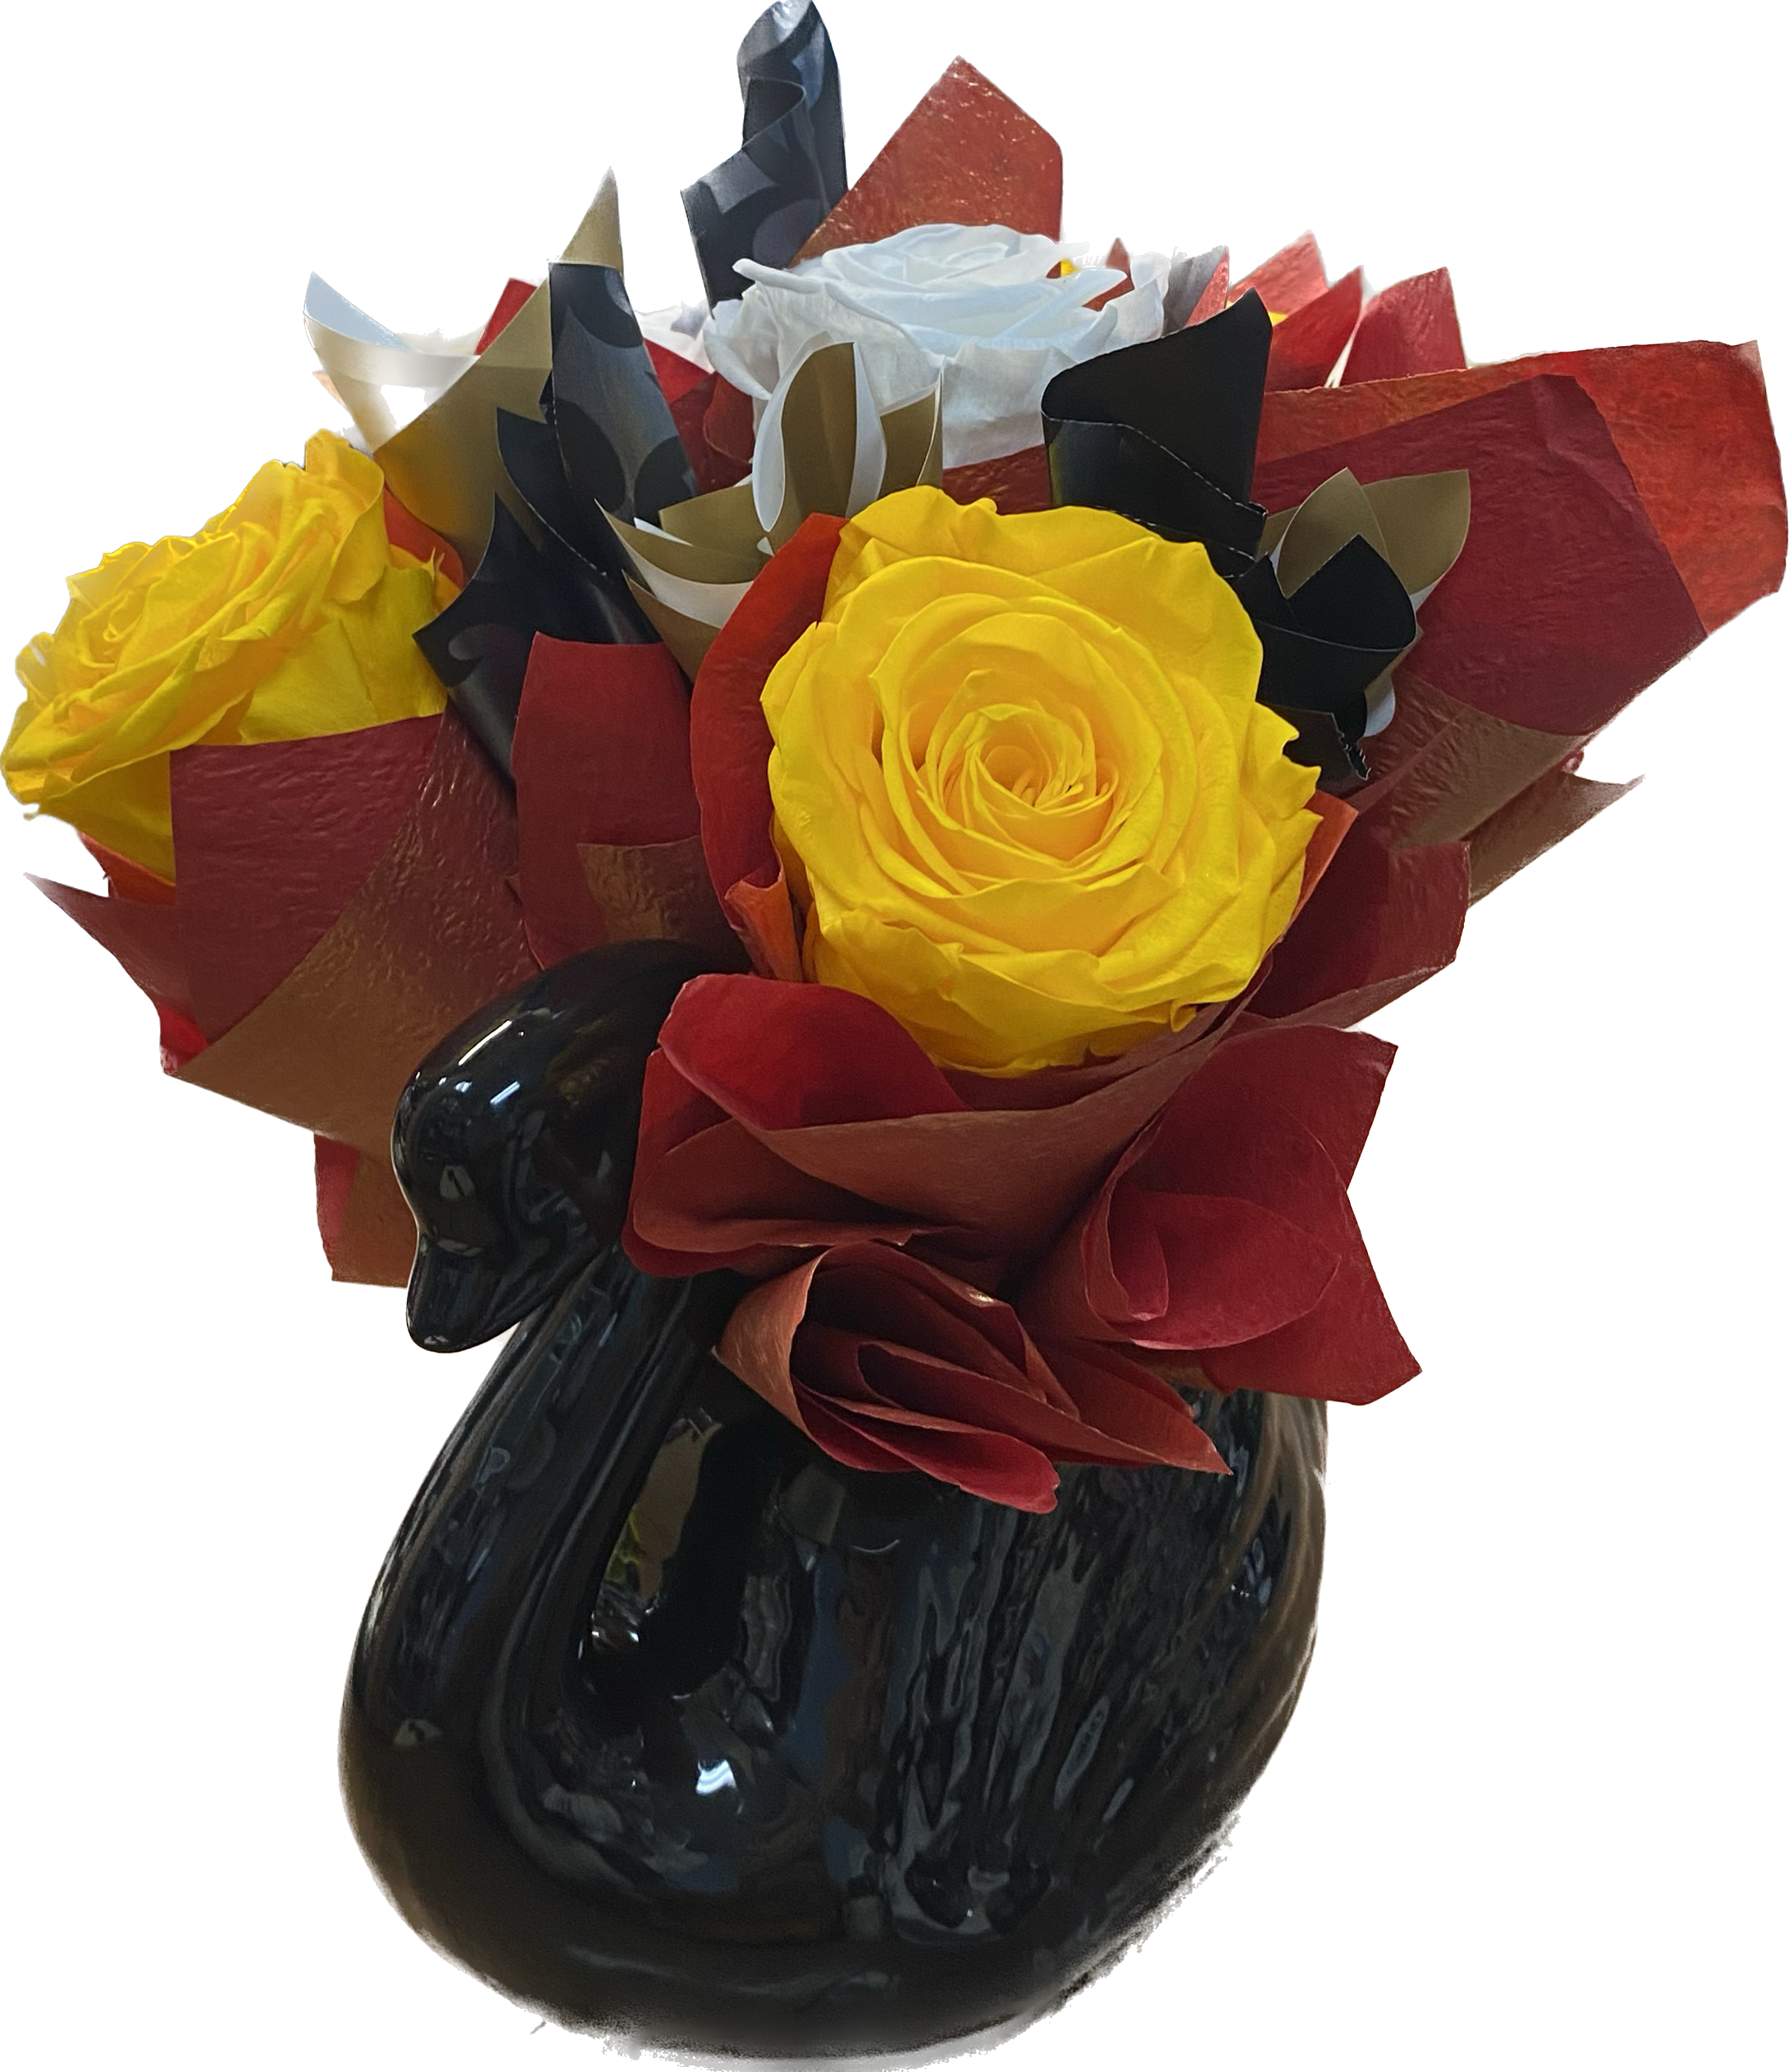 6-12 Forever Roses Wrapped And Arranged In Vase - Forever Roses Wrapped and Arranged in Vase. Can be made in any color and wrapping. 6 Rose ($99.99) , 10 Rose ($160), and 12 Rose ($200) options available.